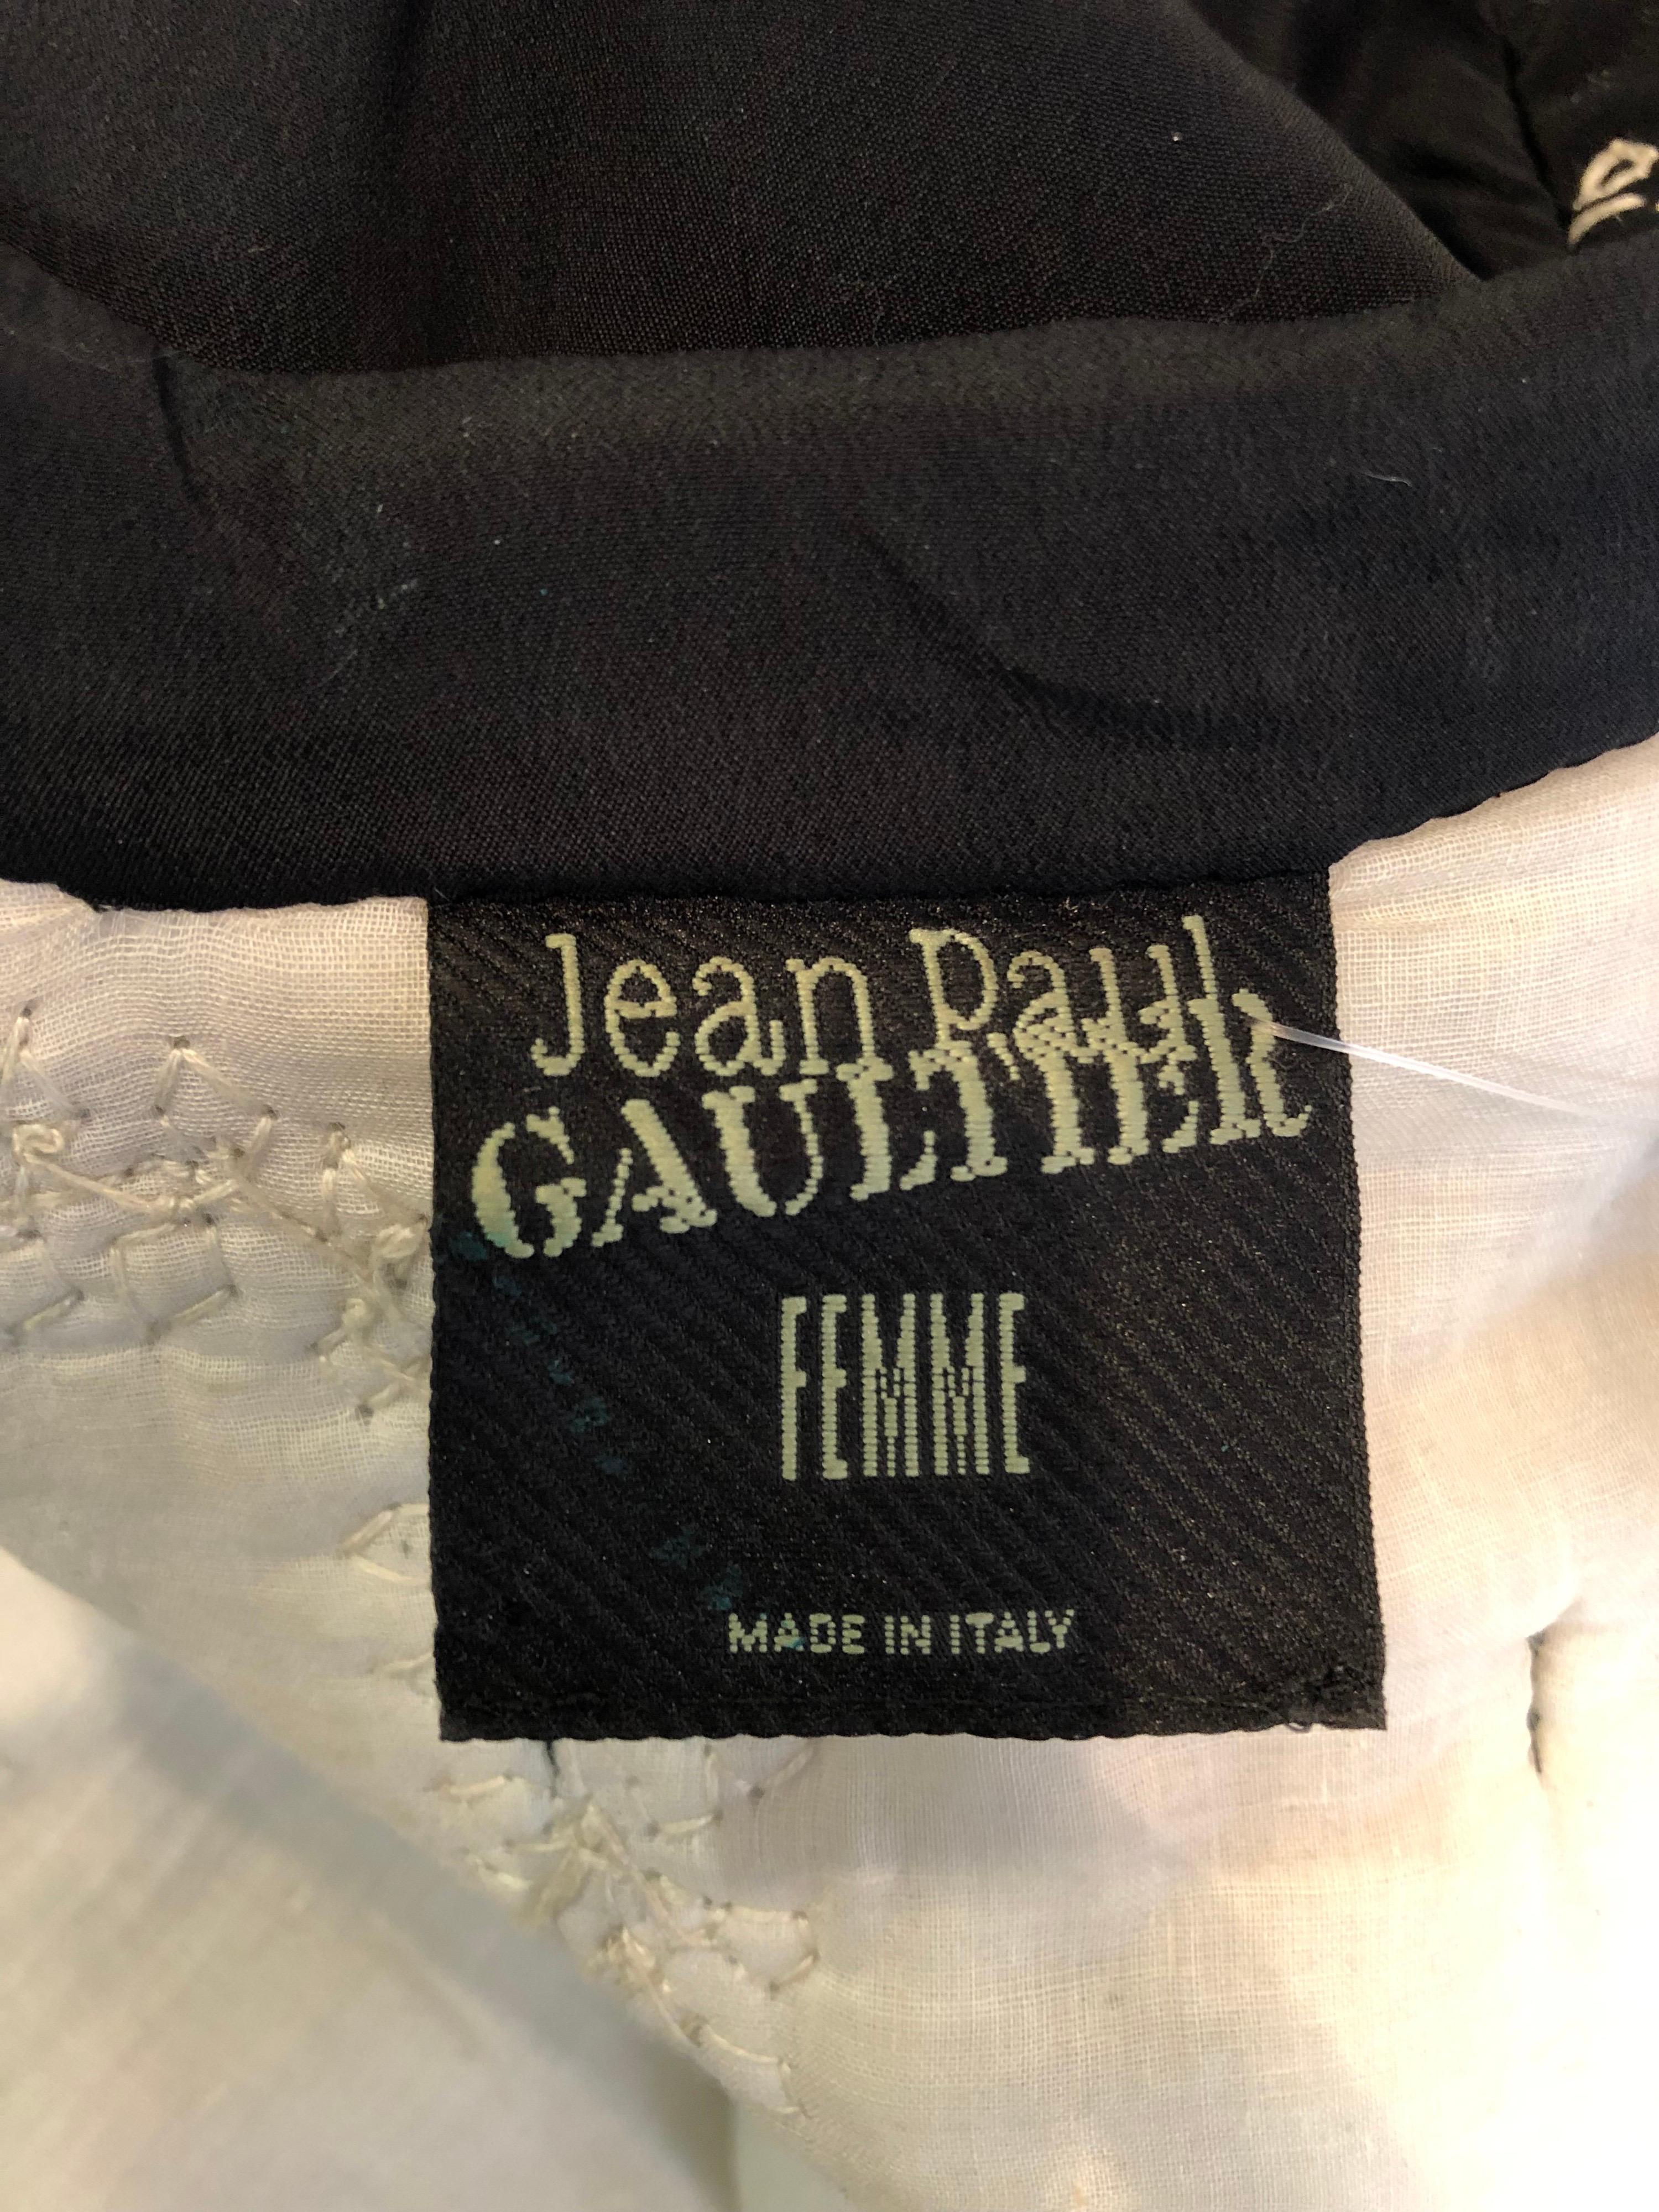 Jean Paul Gaultier embroidery jacket  For Sale 8